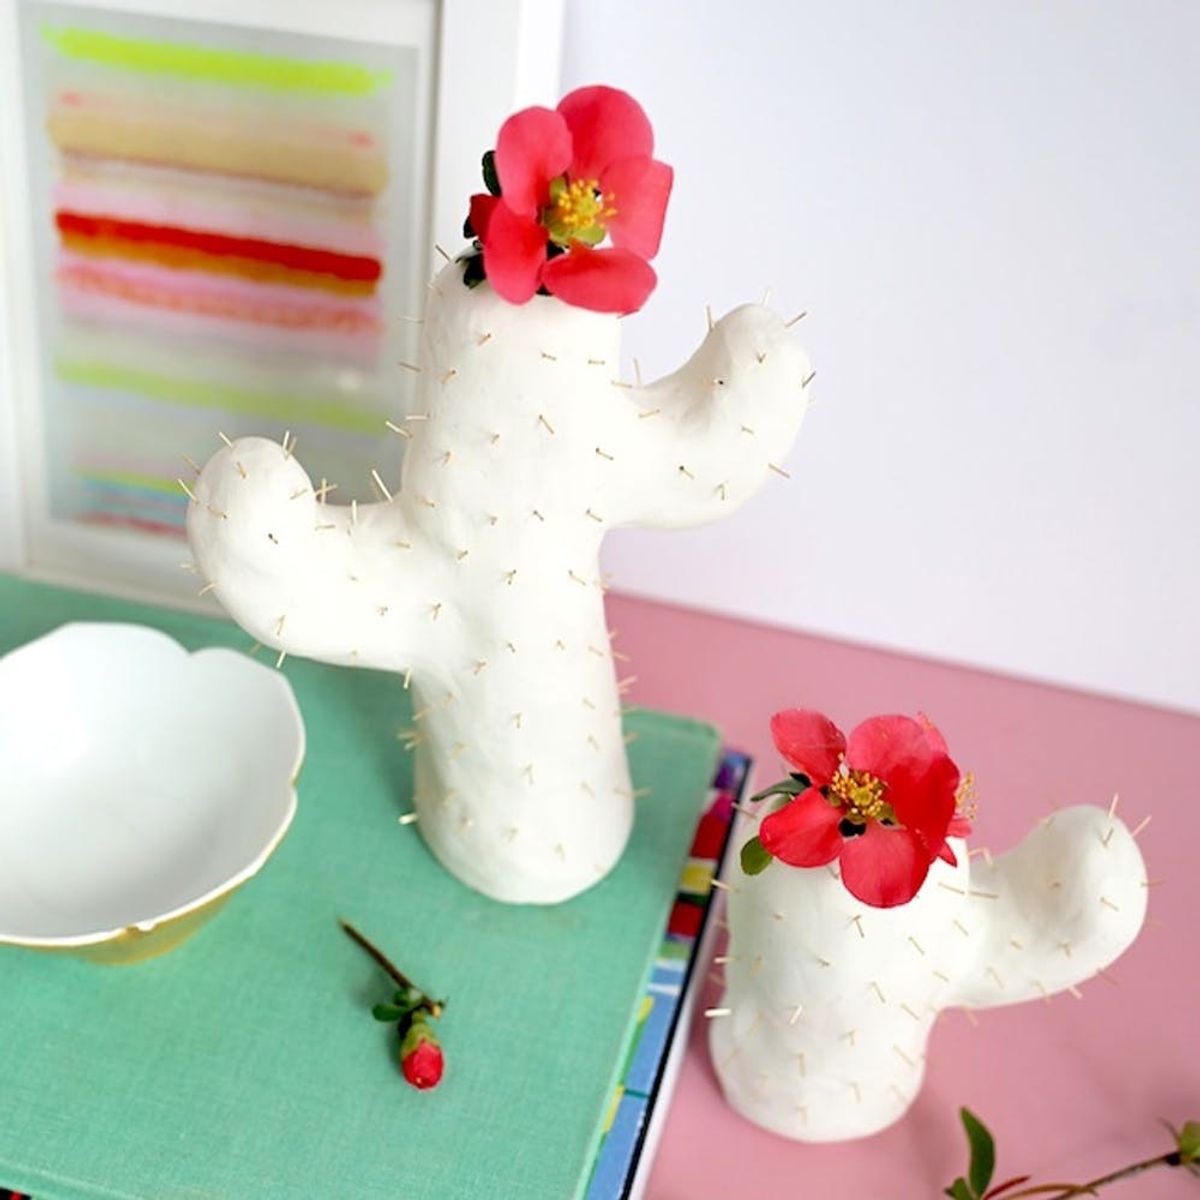 What to Make This Weekend: Cactus Bud Vase, Watercolor Floral Wreath + More